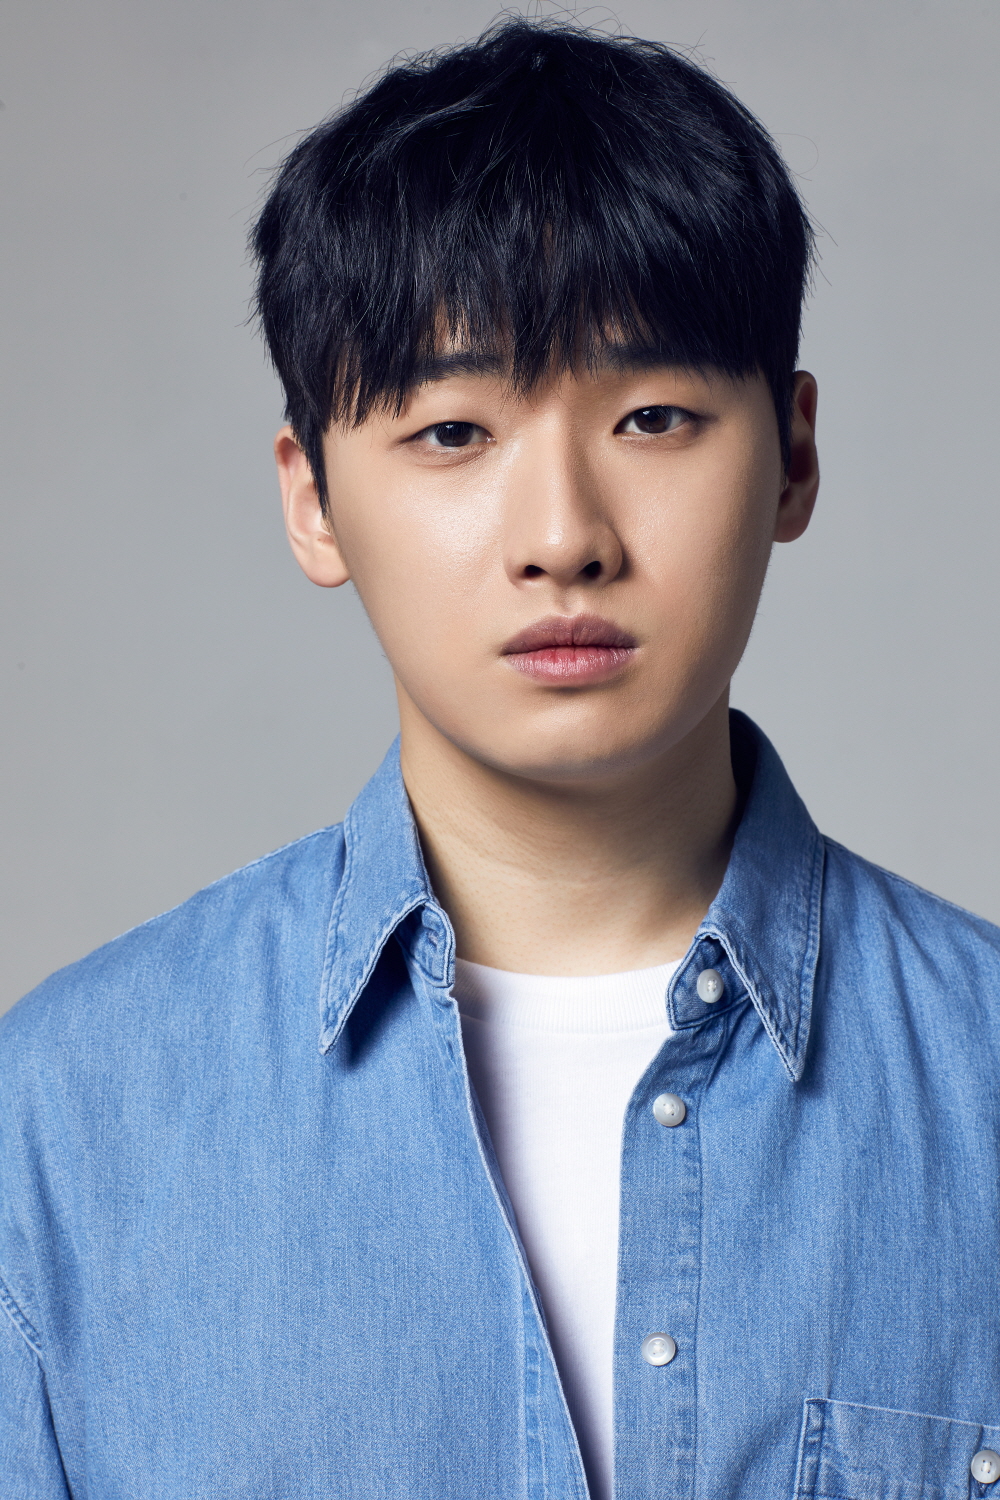 Like the ambassador Lee Ho-jin, do you want to take my side? Actor Lee David completed the Itaewon Clath safely with his teamwork with Park Seo-joon.Lee David joined forces with Roy (Park Seo-joon), who helped him after being bullied by his high school days, in the JTBC gilt drama Itaewon Klath (playplayplayed by Cho Kwang-jin and director Kim Sung-yoon), which ended on March 21, to break down a giant restaurant giants family. He played the role of Jin.He has played numerous roles since his debut, but his role as Lee Ho-jin was a challenge for Lee David as well.When I was first offered the role of Lee Ho-jin by the director, I was not sure that I could express my role well.Lee David said, I liked the genre like a comic dress, so I also enjoyed the original Itaewon Klath.But I was wondering if I could do well and I was worried. I have never played a role like a so-called elite wearing a suit.I was worried about being a friend with my brother (Park) Seo-joon, he said.The most prominent scene of Lee David and Park Seo-joons breathing is the scene where Lee Ho-jin visits the prison of Park Seo-joon.In the play, Roy puts his fist on the glass wall of the visiting room, saying to Lee Ho-jin, who has endured the harassment of The Fountainhead for revenge, Lee Ho-jin, do you want to take my side? Lee Ho-jin also punches him, answering, I came to do that.Until the moment of the shooting, Lee David had no idea how to express this scene, and he was worried that if he expressed it like a webtoon, he would break the entire flow of the drama.It is Park Seo-joon that blew the troubles in one room.Lee David said, I was worried about how to express it even if I kept thinking about it. On the day of shooting, Seo-joon laughed and laughed.I felt something unravelled when I saw it. He said, Every time I played the scene, I was worried not to look overly.Most of the characters, Lee Ho-jin, are with Roy, and every time I shoot, Im very much dependent on my brothers performance, he added.The biggest worry about the character Lee Ho-jin is his Friend acting with Park Seo-joon.For viewers, it was key that Park Seo-joon and Lee David didnt feel disparate with the setting of Friend.Lee David continued to worry that Seo-joon  could look like a friend with his brother, as if it was awkward to play in a suit.You cant be a distraction, he said. You made me joke a lot and make me feel comfortable.Ive been caught up in how to deal with it because I made him as clear as Friend, he praised.Lee David commented, I was most impressed by the scene where Roy comforted Hyun-yi (Lee Joo-young), who was forced to reveal that he was a transgender.Park Seo-joons calm and heavy speech is outstanding in the scene that I have played it so many times.In response, he said, There is a scene in the play where the new Roy comforts the new, I am me, I do not need the others understanding.The ambassador was good, but Seo-joon said, Im okay. And I liked the look on her face, which was crying when she heard it.Lee David, who filmed most of the scenes with Park Seo-joon, Kim Hye-eun and Kim Dae-mi, expressed regret that he wanted to hang out with his family at night.He wanted to feel like he was a member of the staff at night. Lee David said, I always talked to you.I was close to Ryu Kyung-soo, who played Choi Seung-kwon, because he was close to the movie in the past, and Kim Dae-mi was close to the same age, he said. Fortunately, I met with Actors for a while, including at a dinner party, but I seem to have become close to them soon.Lee David continued to praise the heroine Kim Dae-mi. The difference between movies and dramas is great.I had difficulty or trouble because it was the first time in the drama, but I quickly adapted, he said. I like the unique tone of Dami.Lee Ha-na